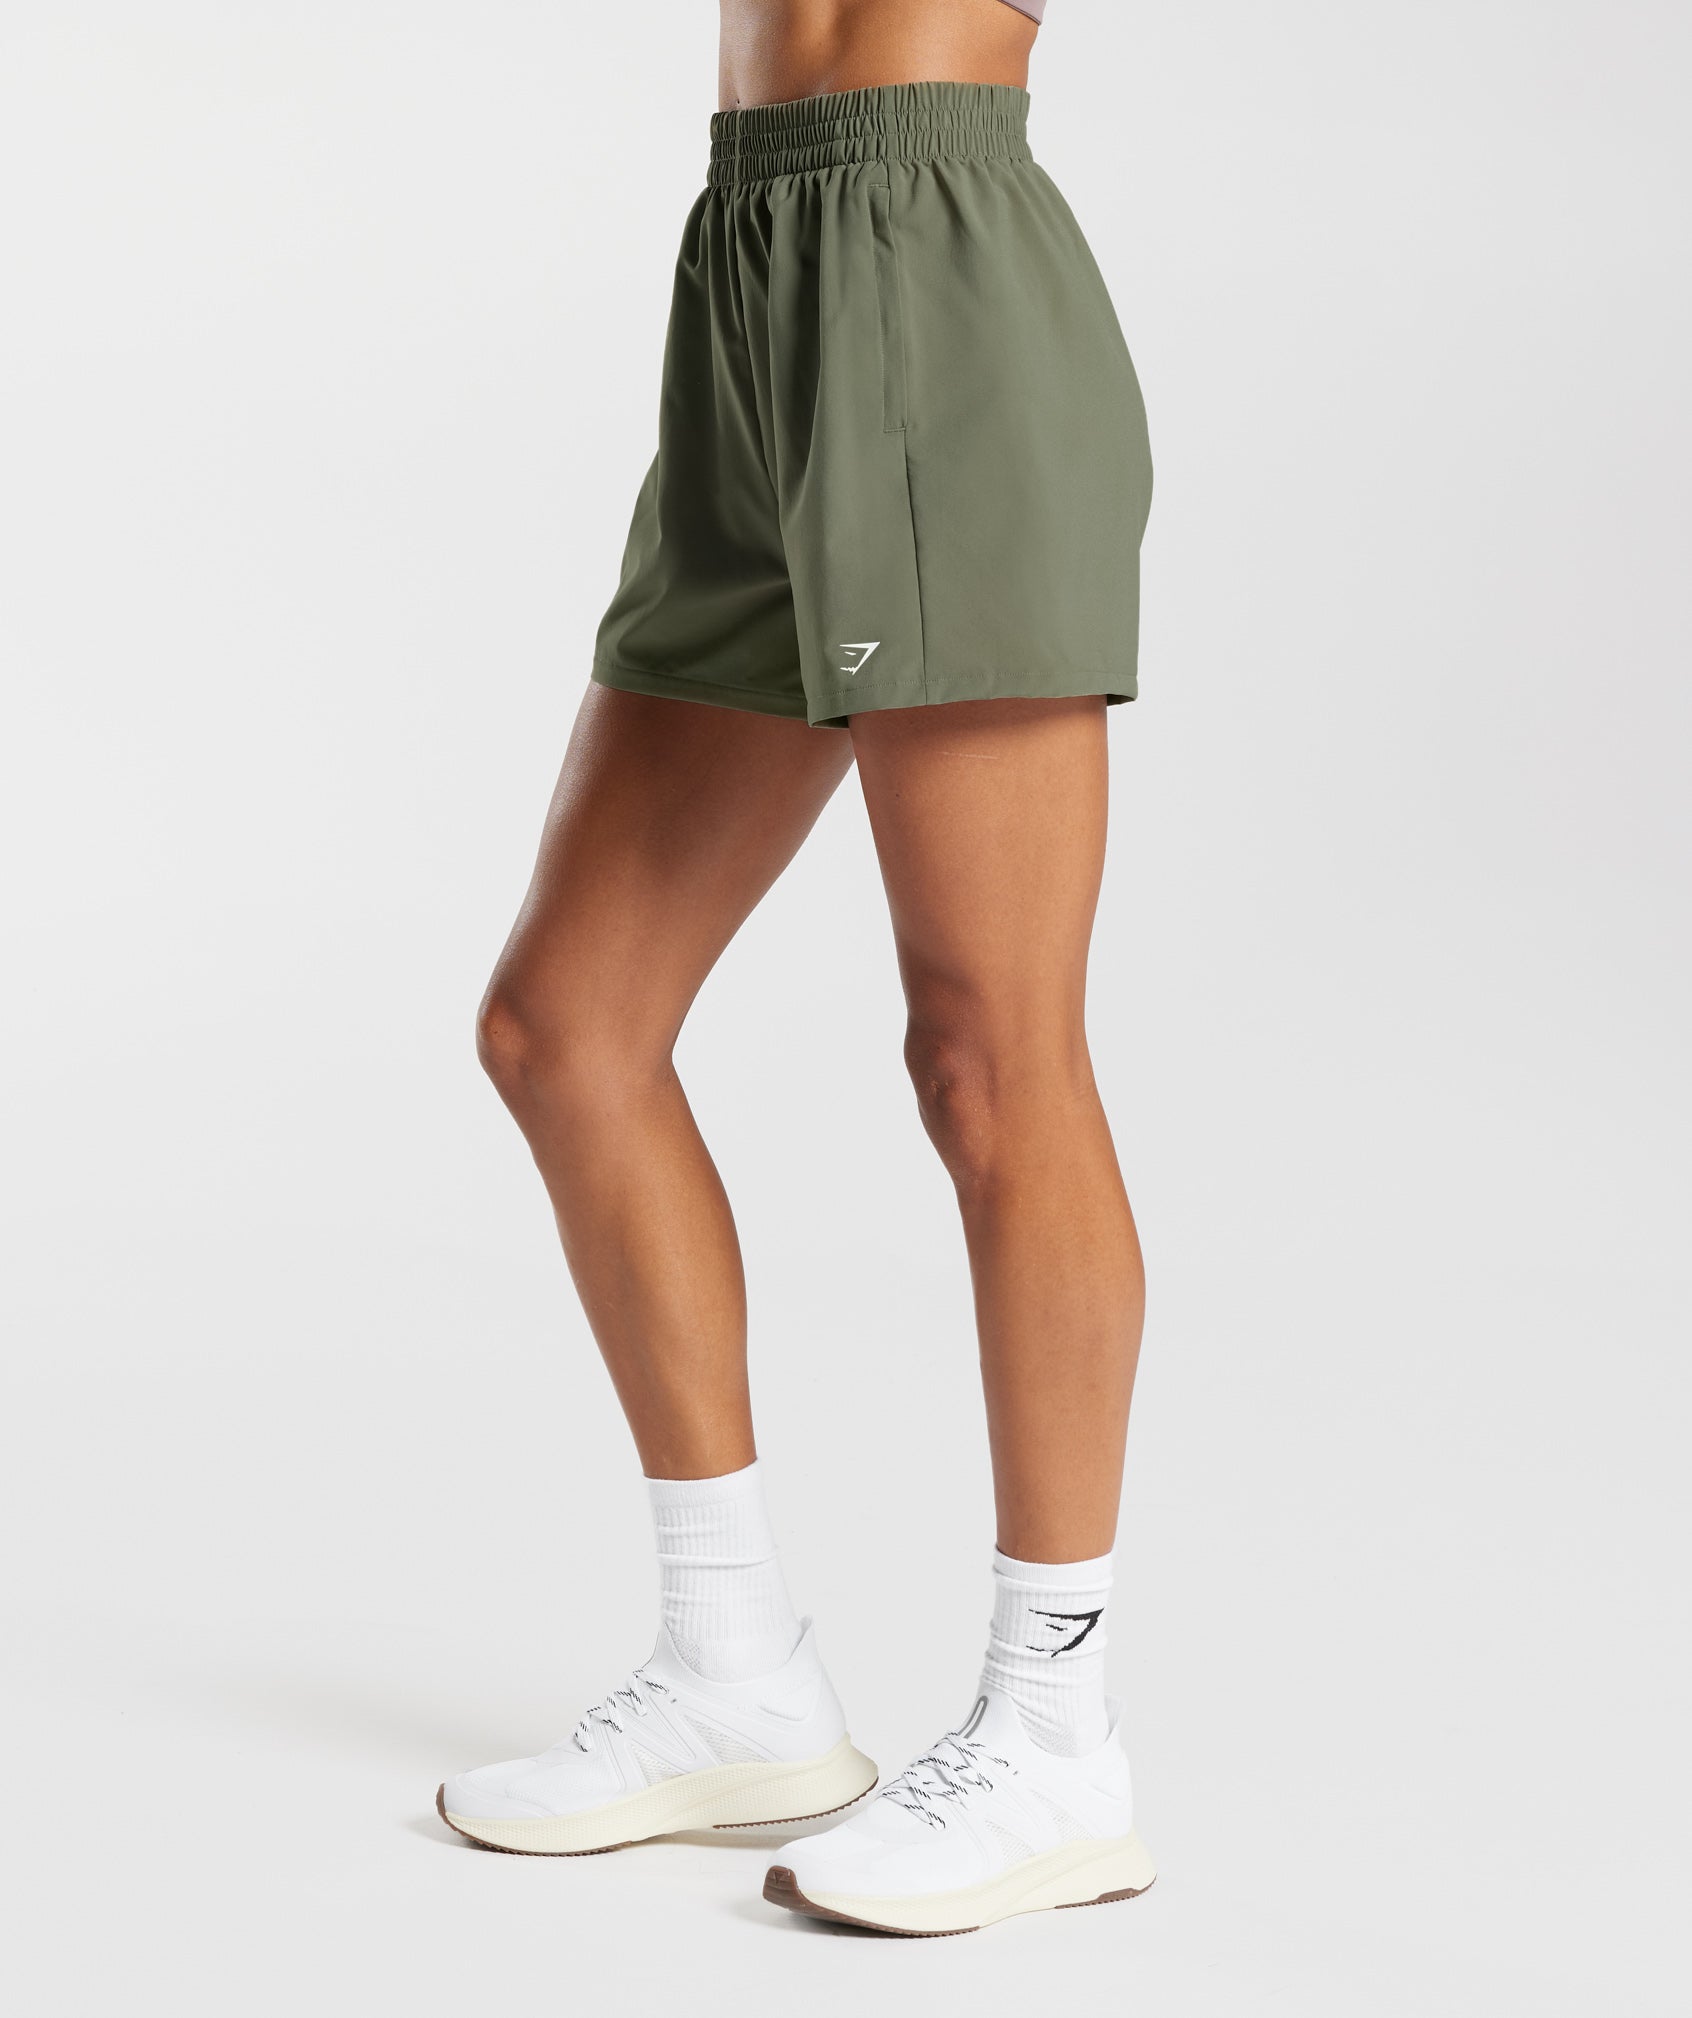 Woven Pocket Shorts in Dusty Olive